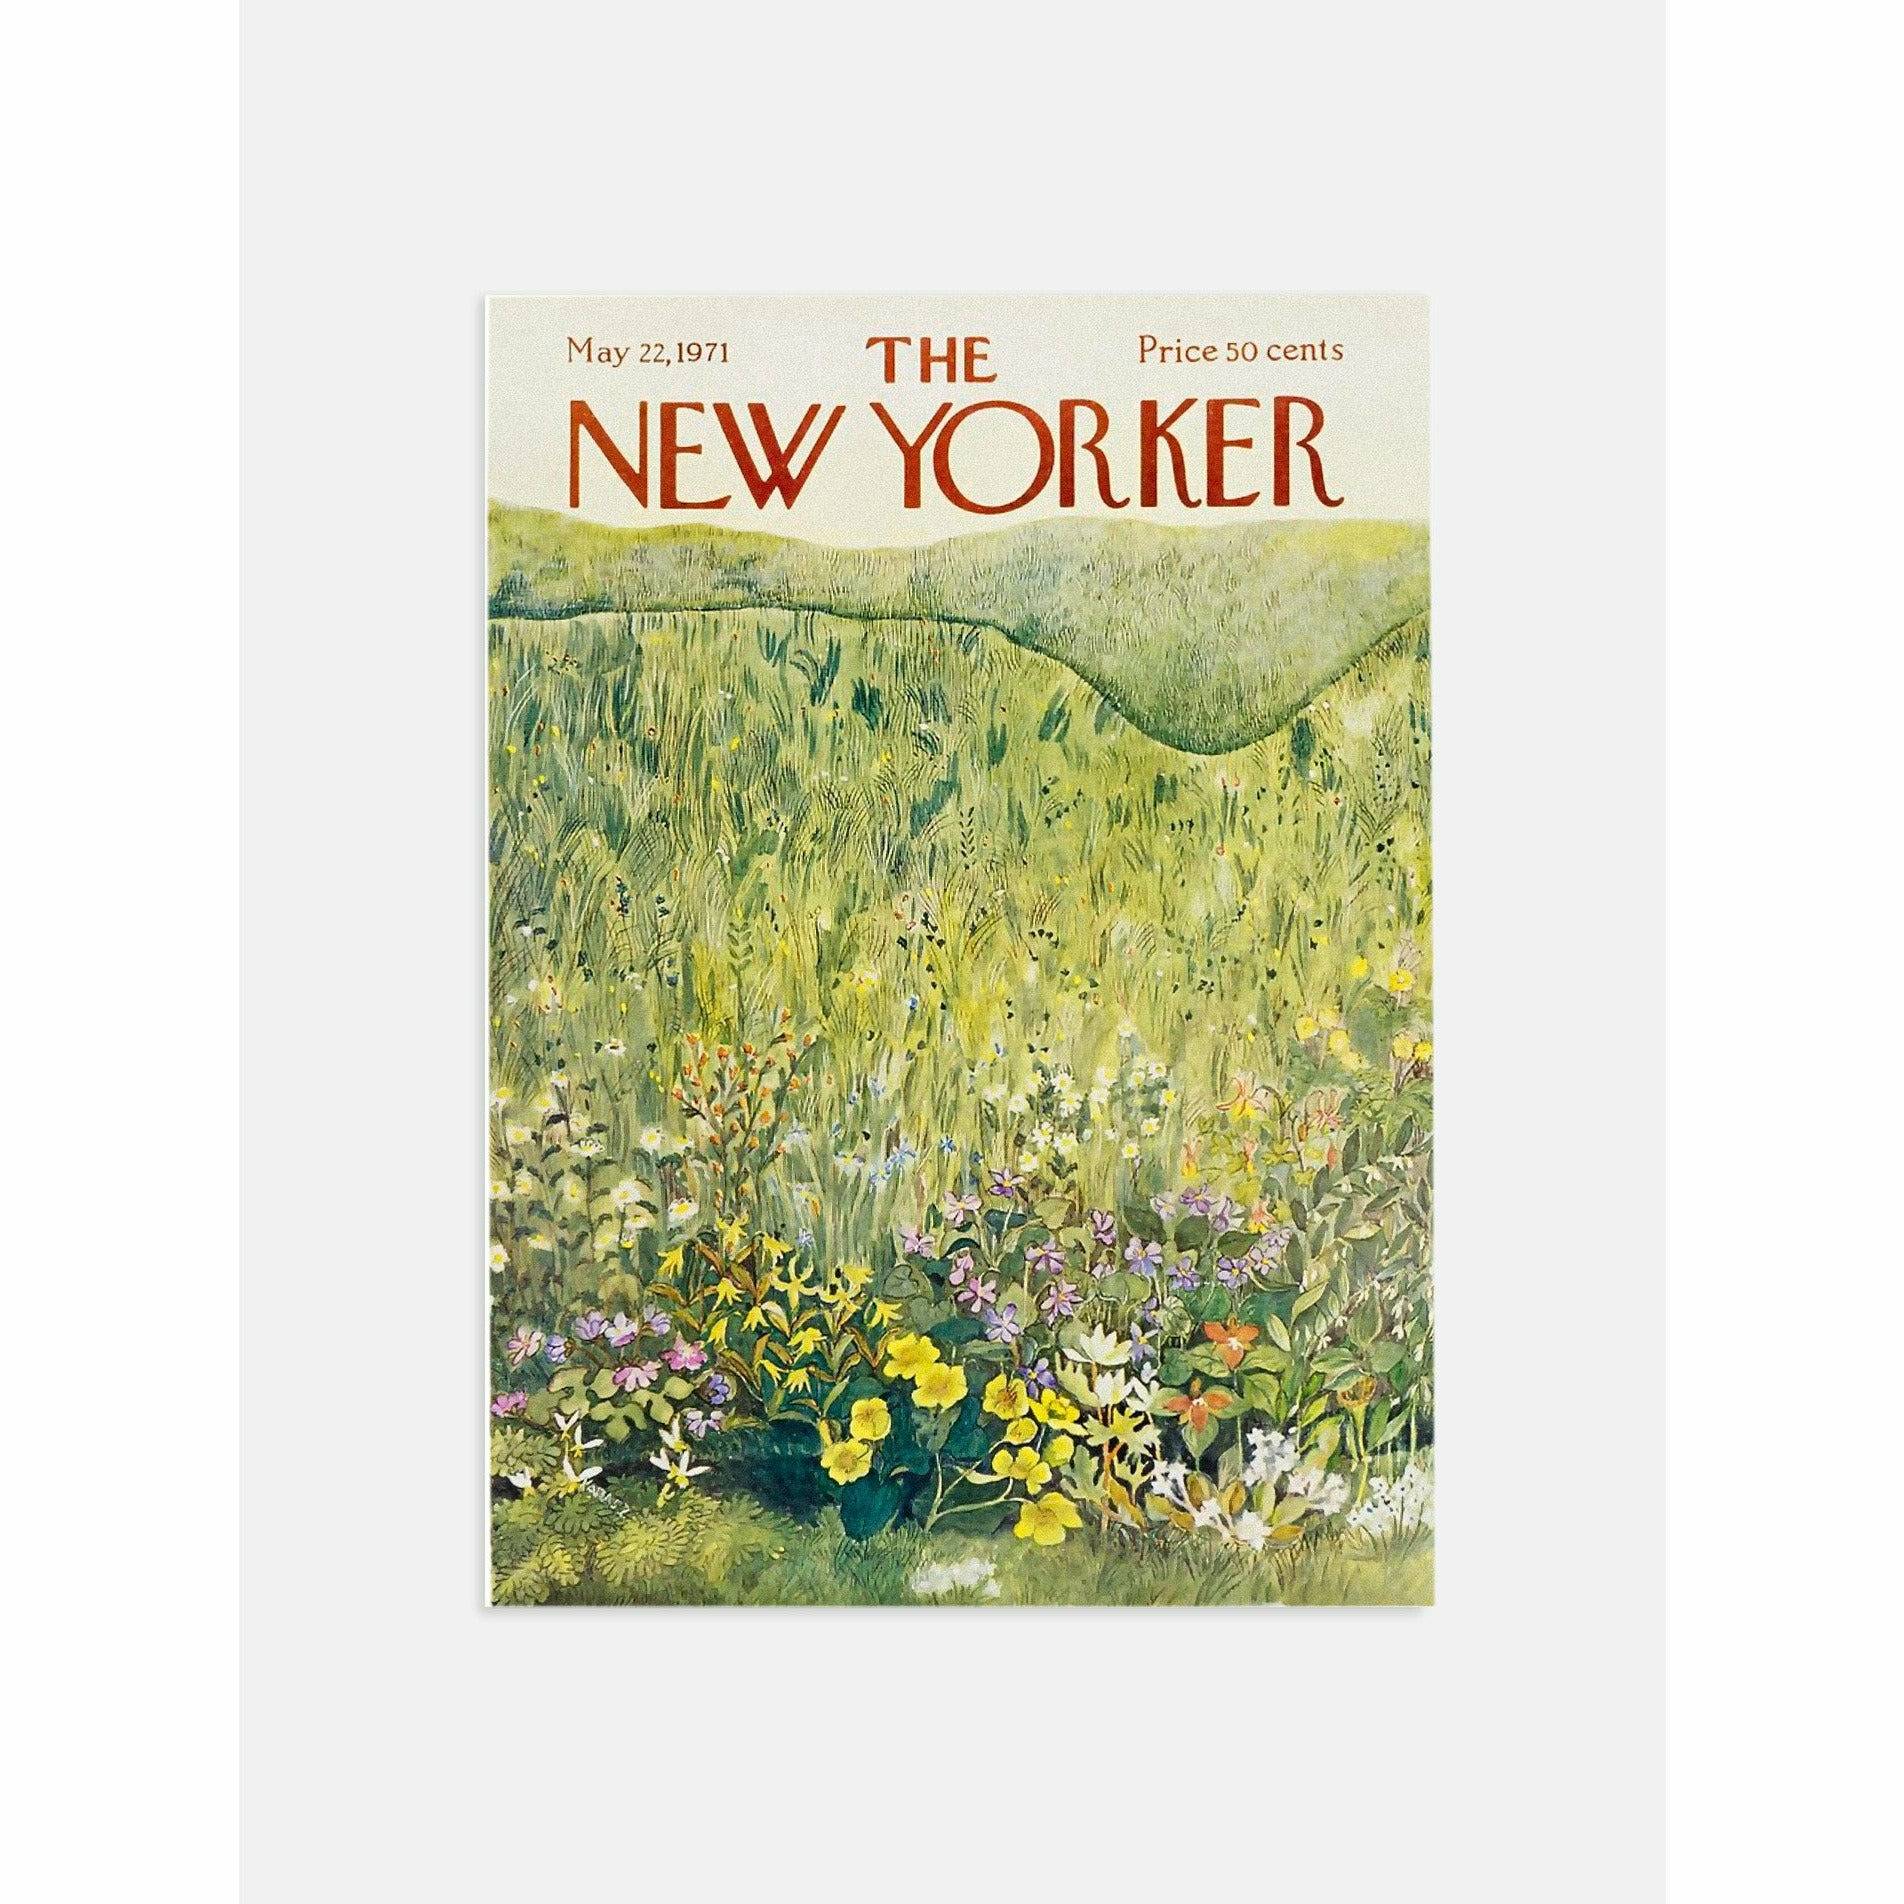 The New Yorker 1971 Poster